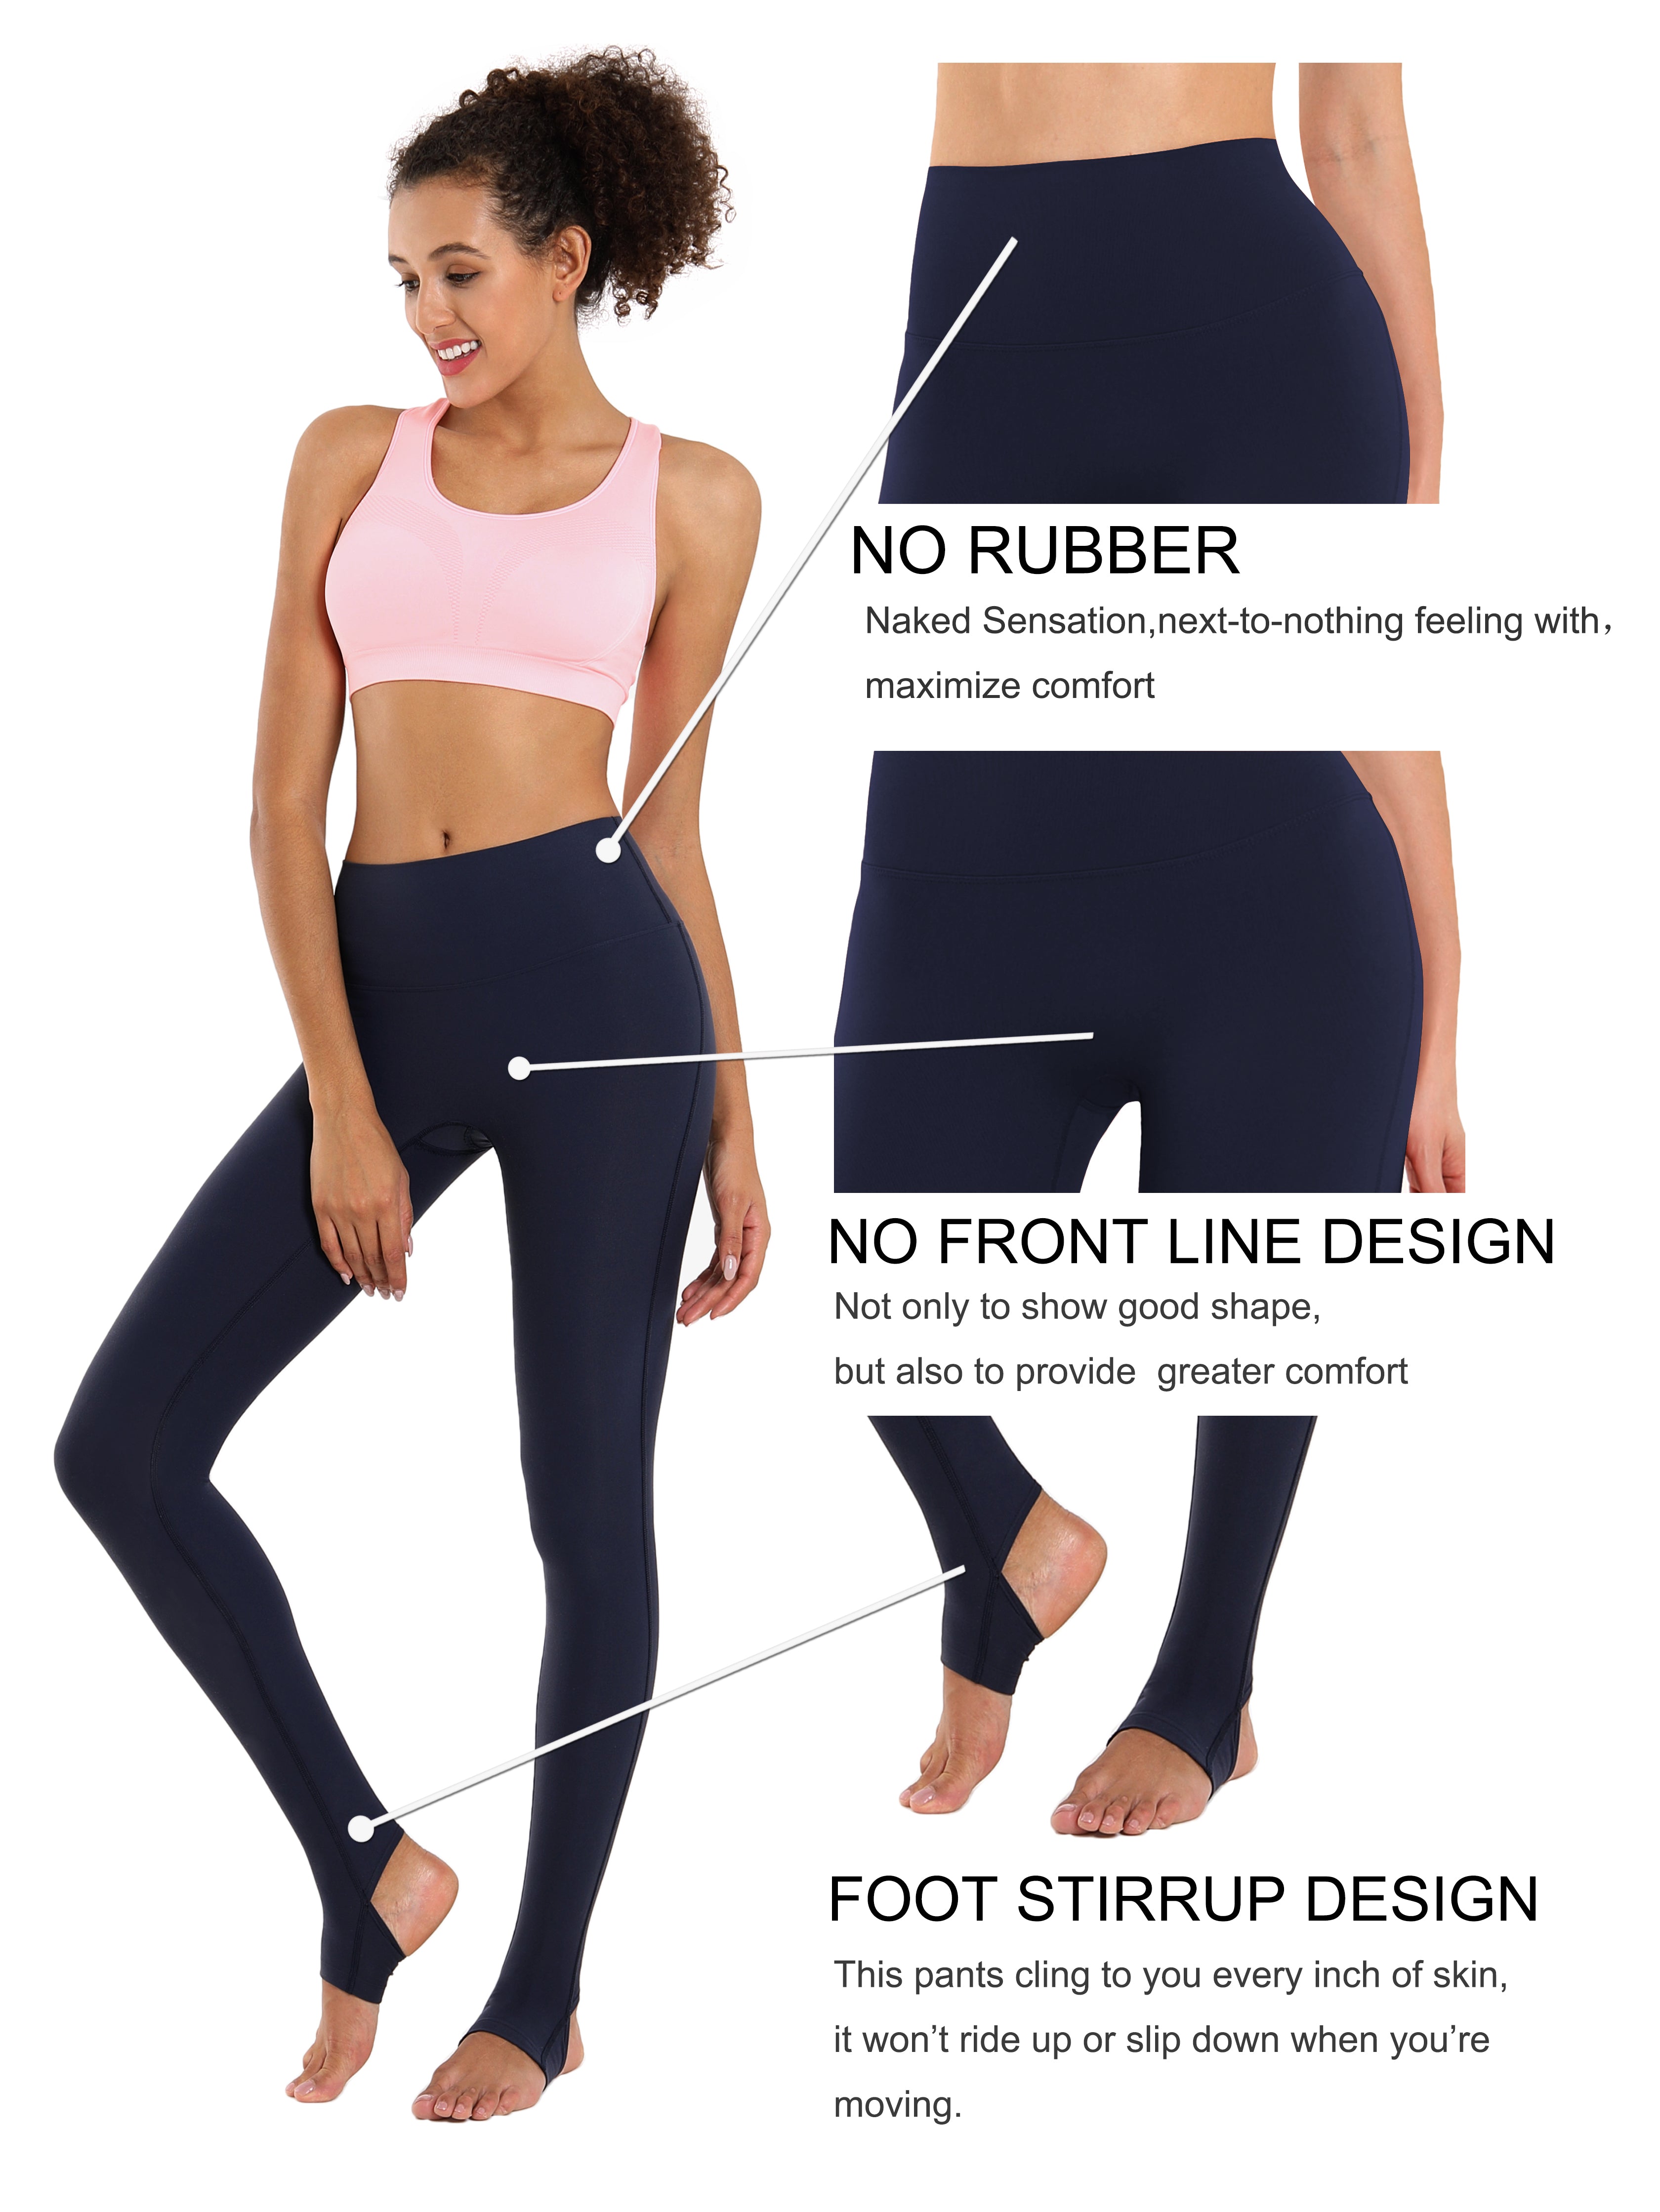 Over the Heel Jogging Pants darknavy Over the Heel Design 87%Nylon/13%Spandex Fabric doesn't attract lint easily 4-way stretch No see-through Moisture-wicking Tummy control